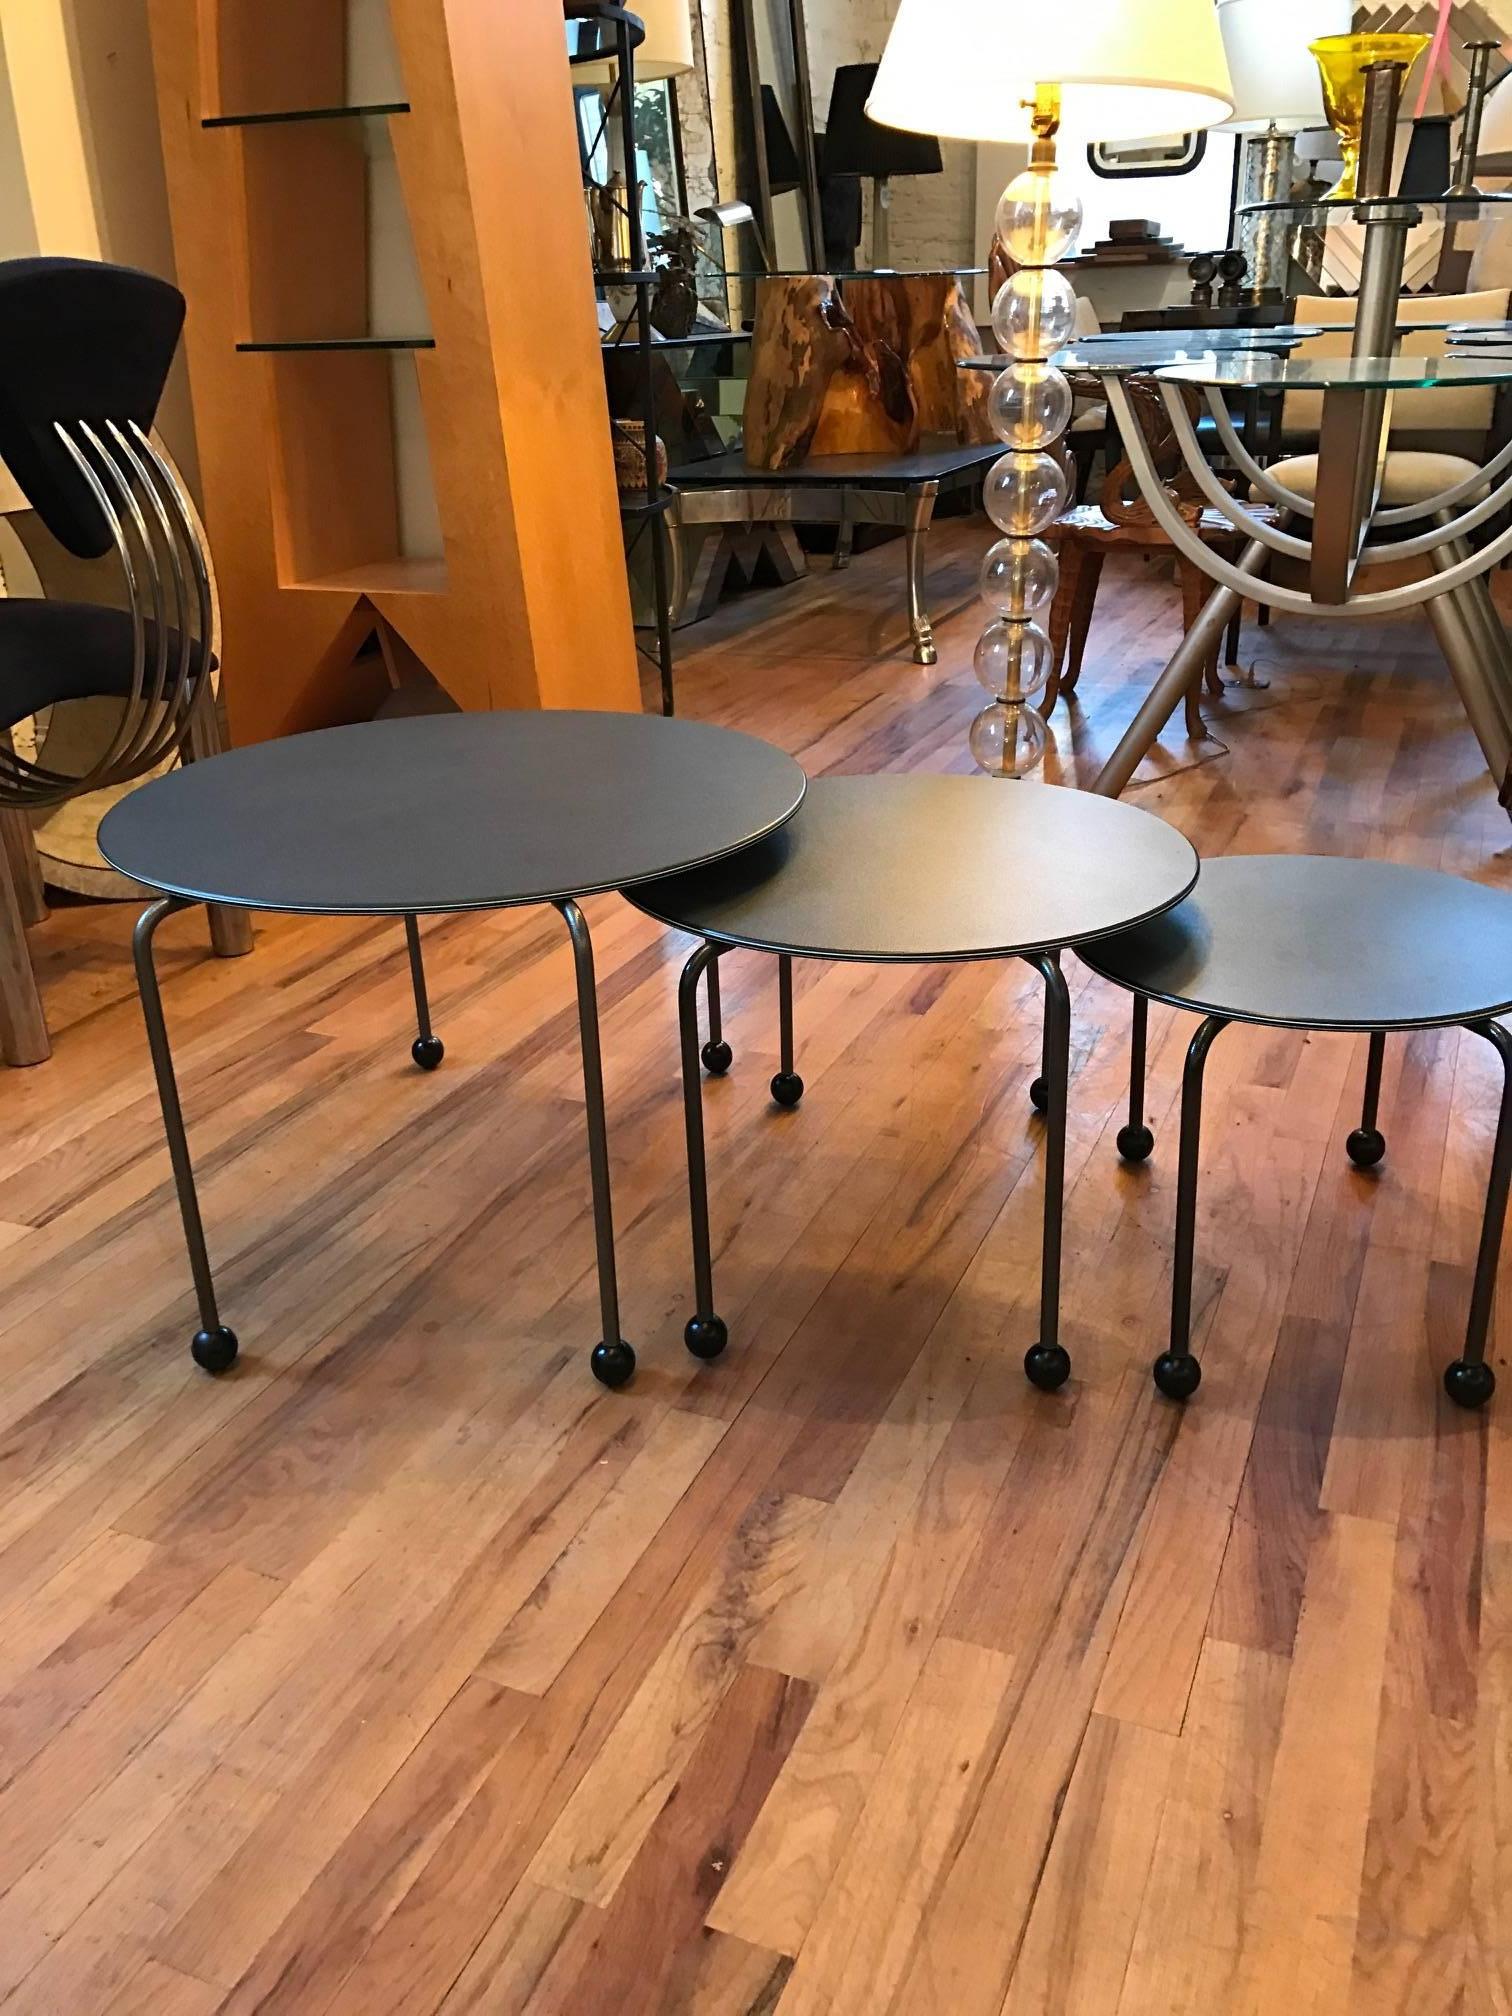 A highly versatile set of Postmodern tables in the manner of Ettore Sottsass and Michele De Lucchi. Would also work well as a coffee table. The tables have enameled wood tops, enameled metal legs, and lacquered wood ball feet.
Dimensions of the